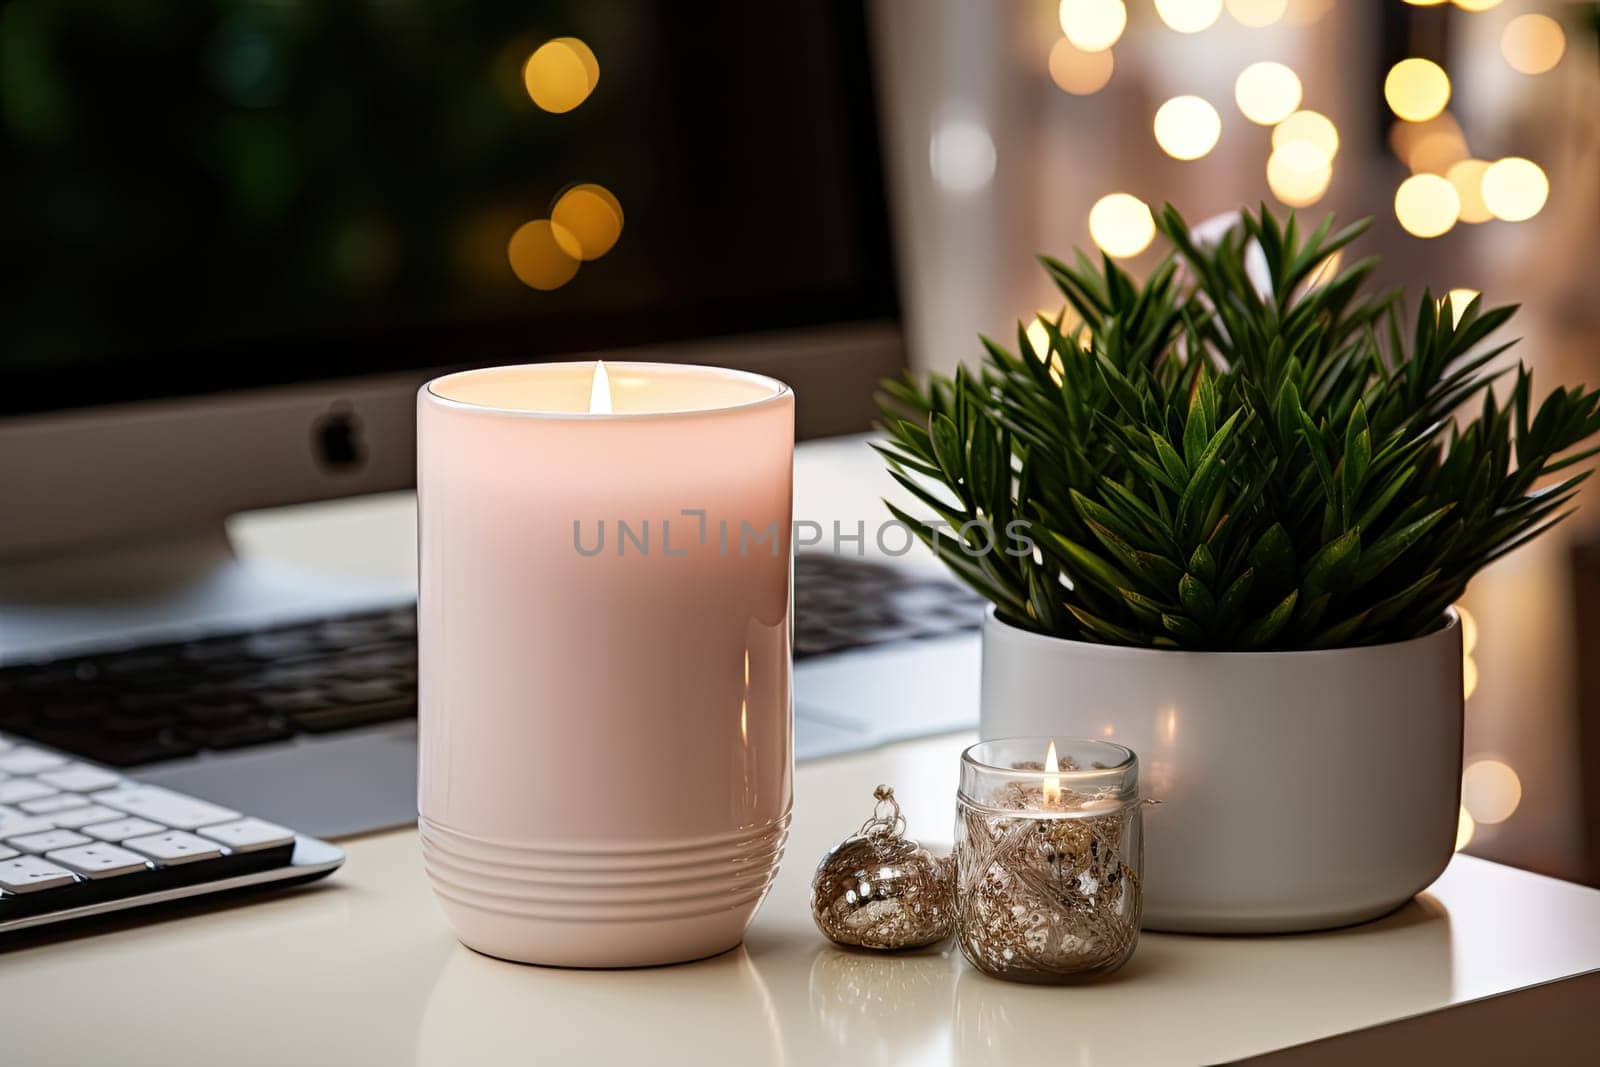 a plant on a desk next to a laptop and a lit candle in front of a computer screen with christmas lights behind it